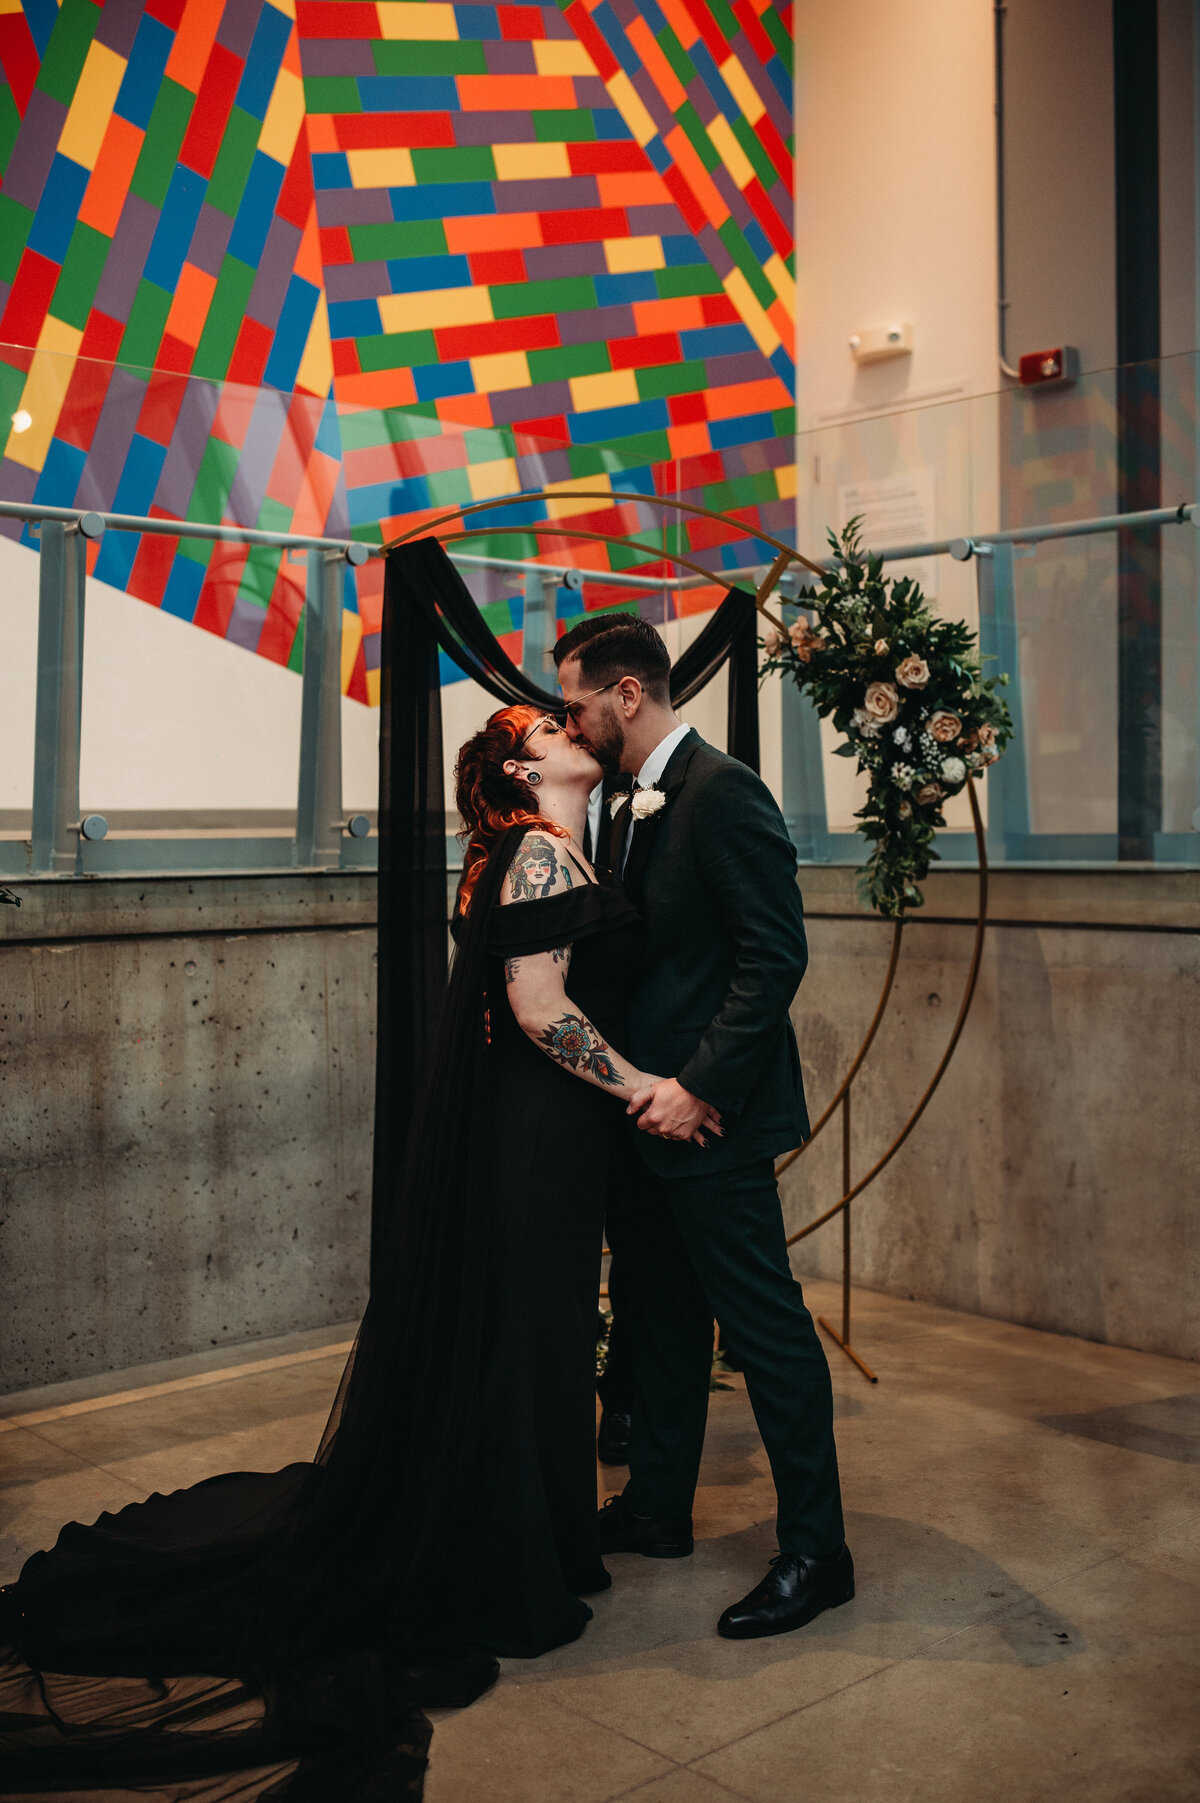 Alternative couple complete their frist kiss in front of a modern arch in Fall ceremony.